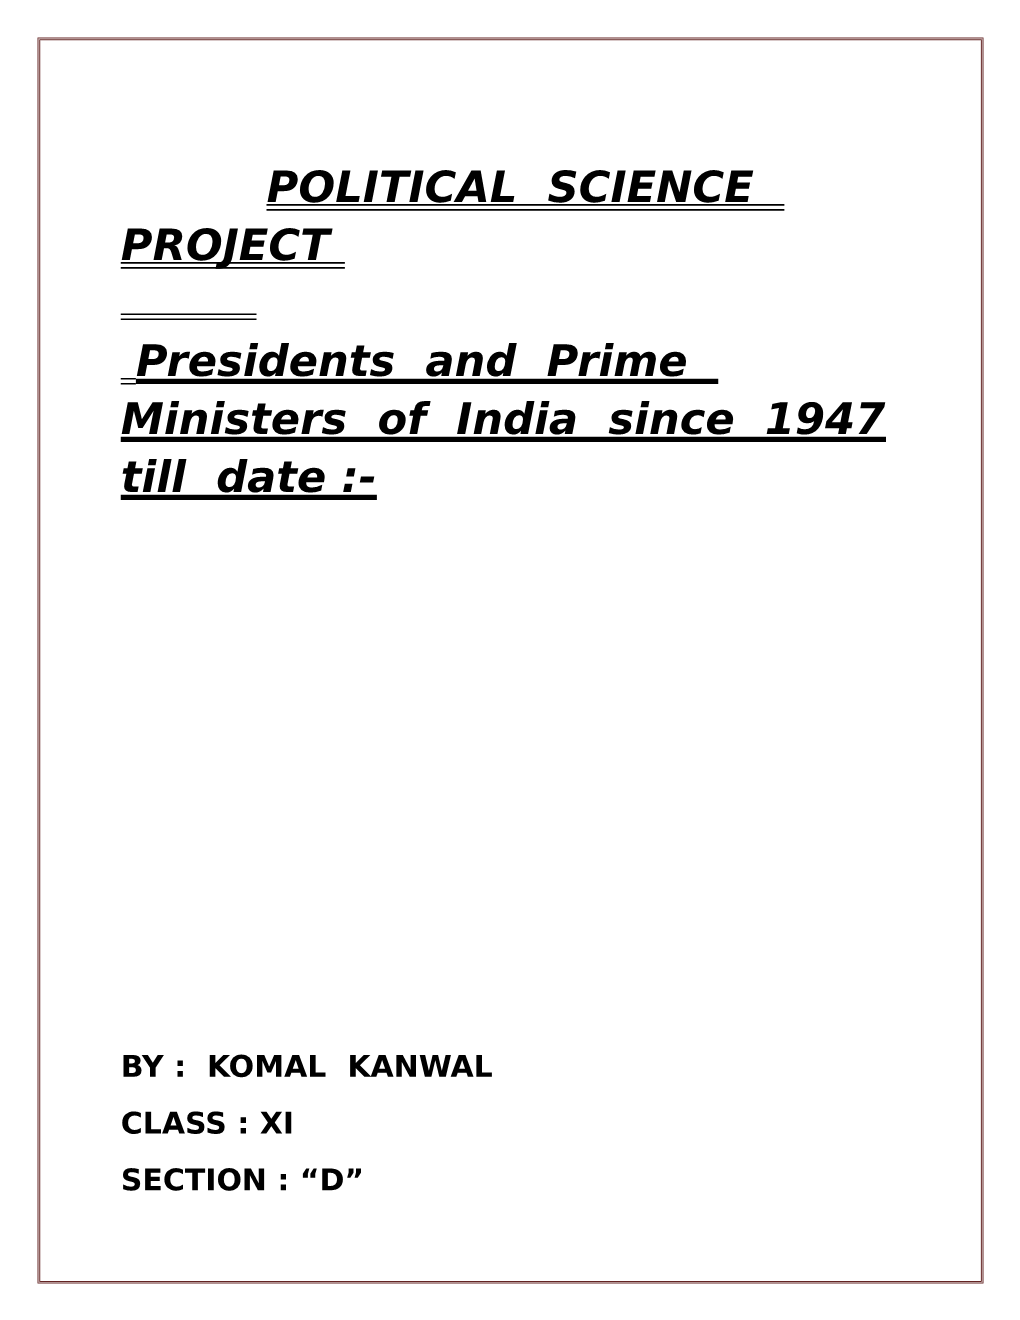 POLITICAL SCIENCE PROJECT Presidents and Prime Ministers Of